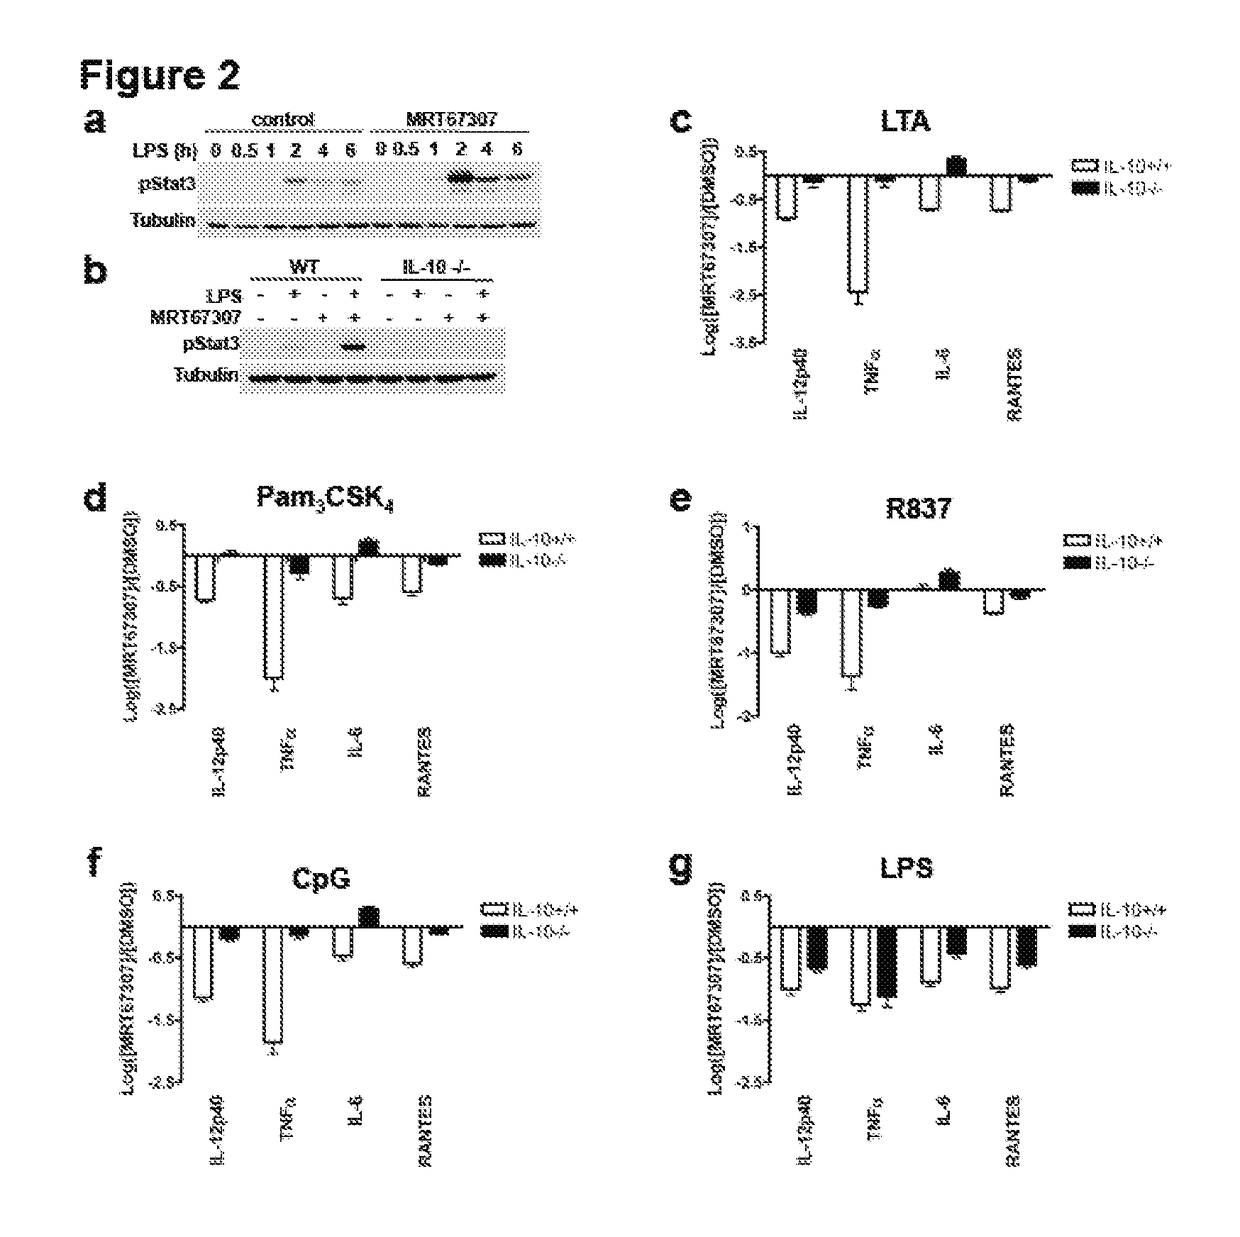 SIK inhibitor for use in a method of treating an inflammatory and/or immune disorder